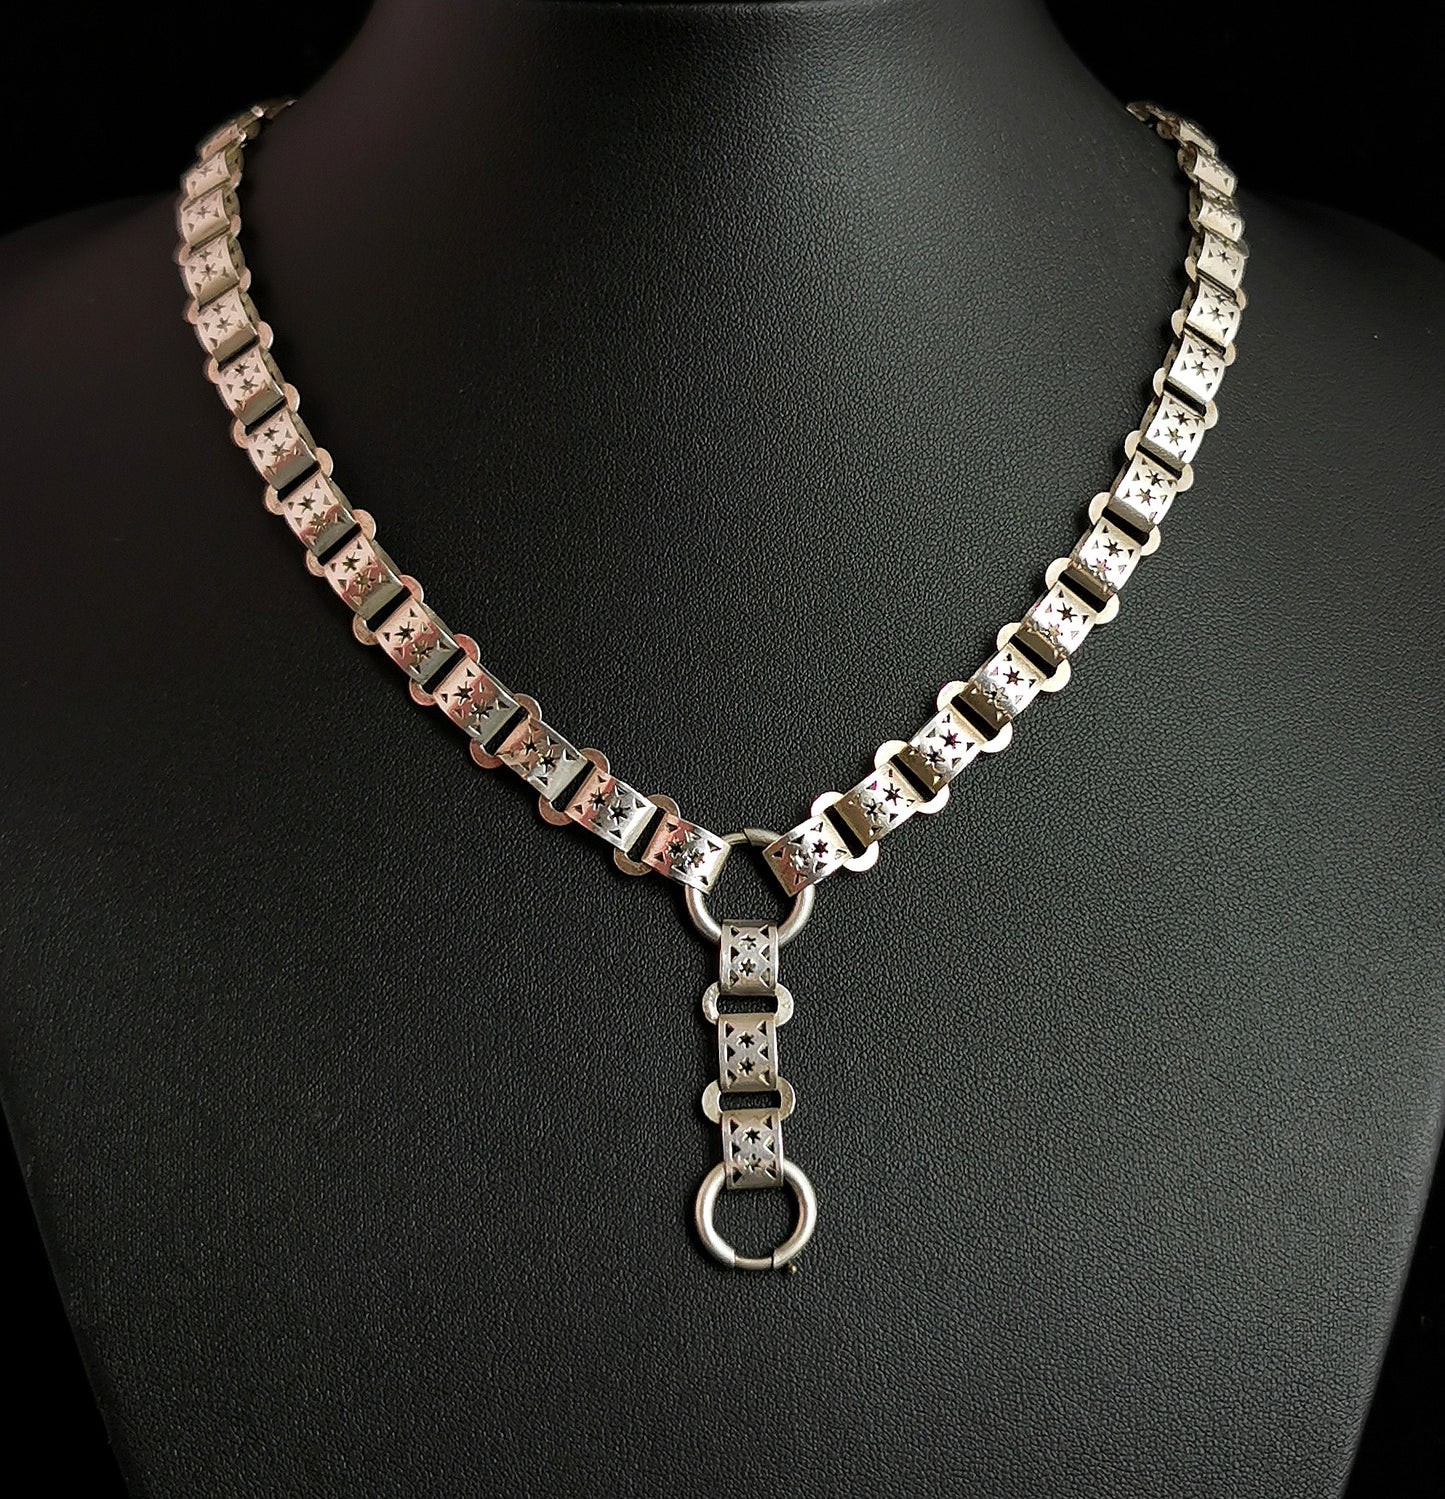 Antique Victorian silver book chain necklace, star links